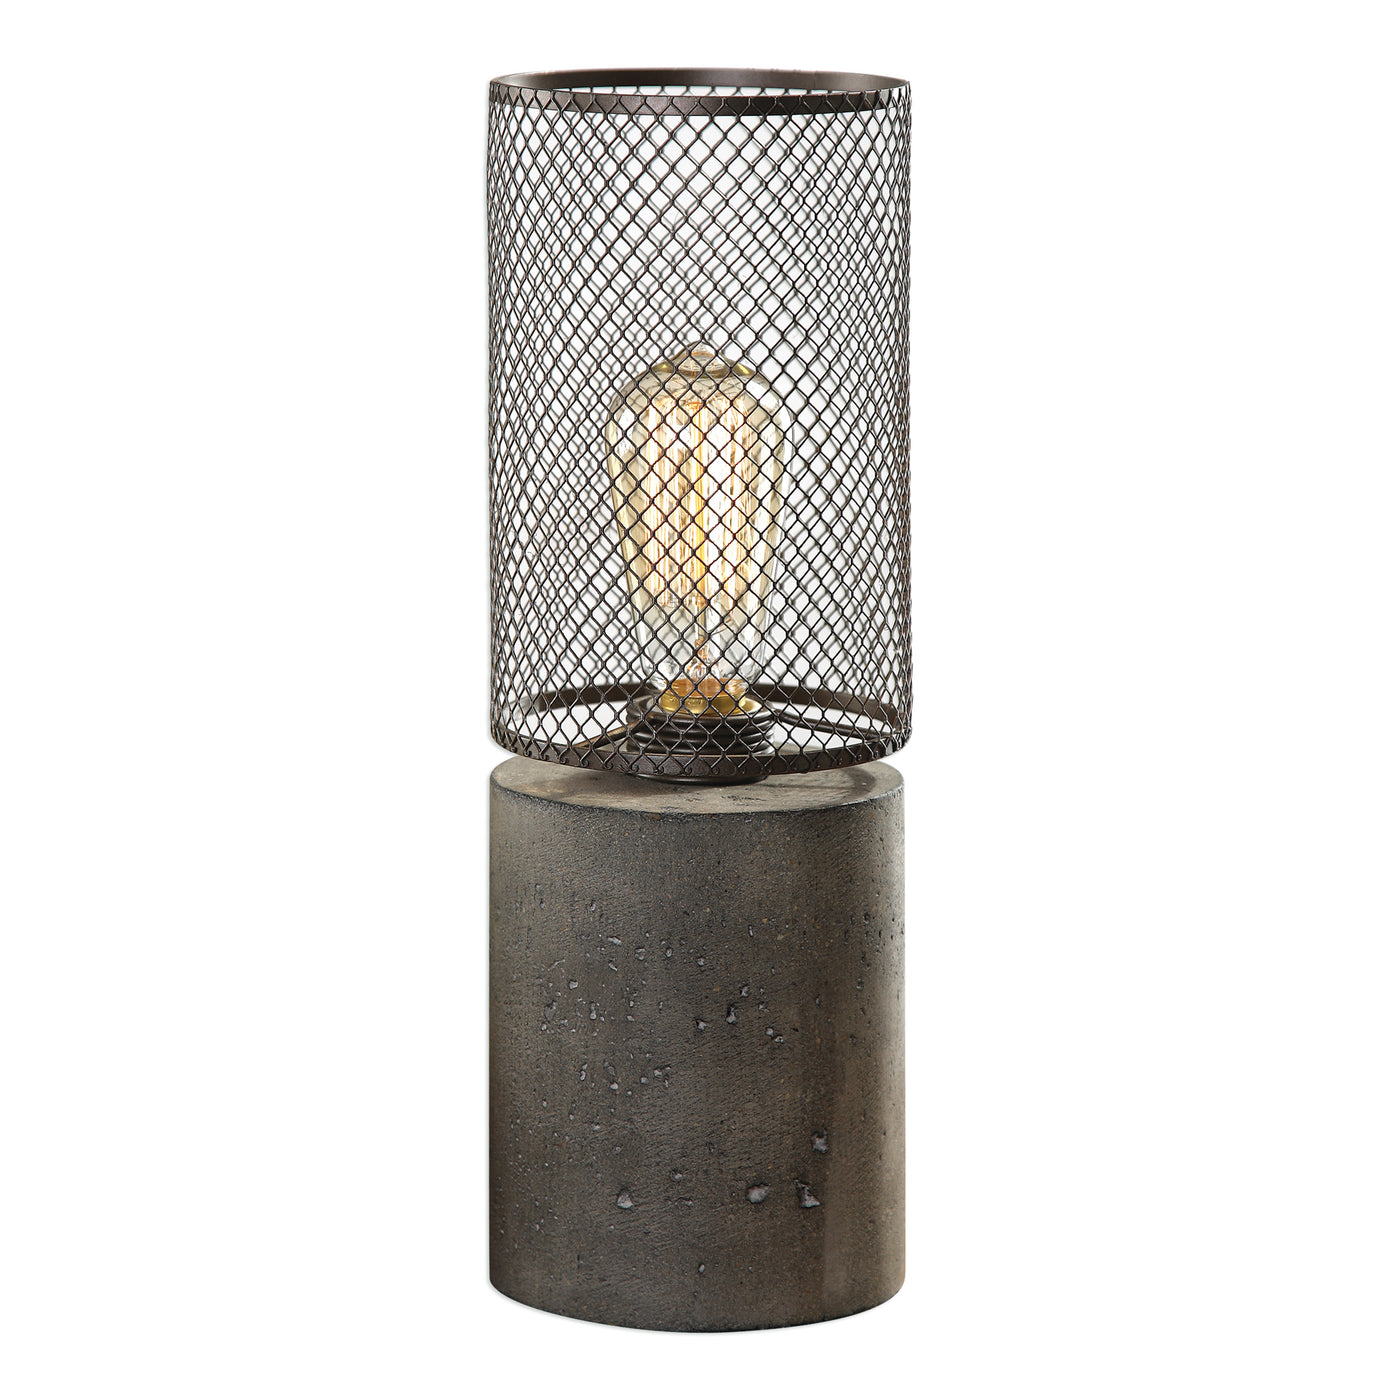 Thick Concrete Column Finished In A Charcoal Stain, Topped With An Industrial Inspired, Rusty Bronze Steel Cage. OIne 60-w...